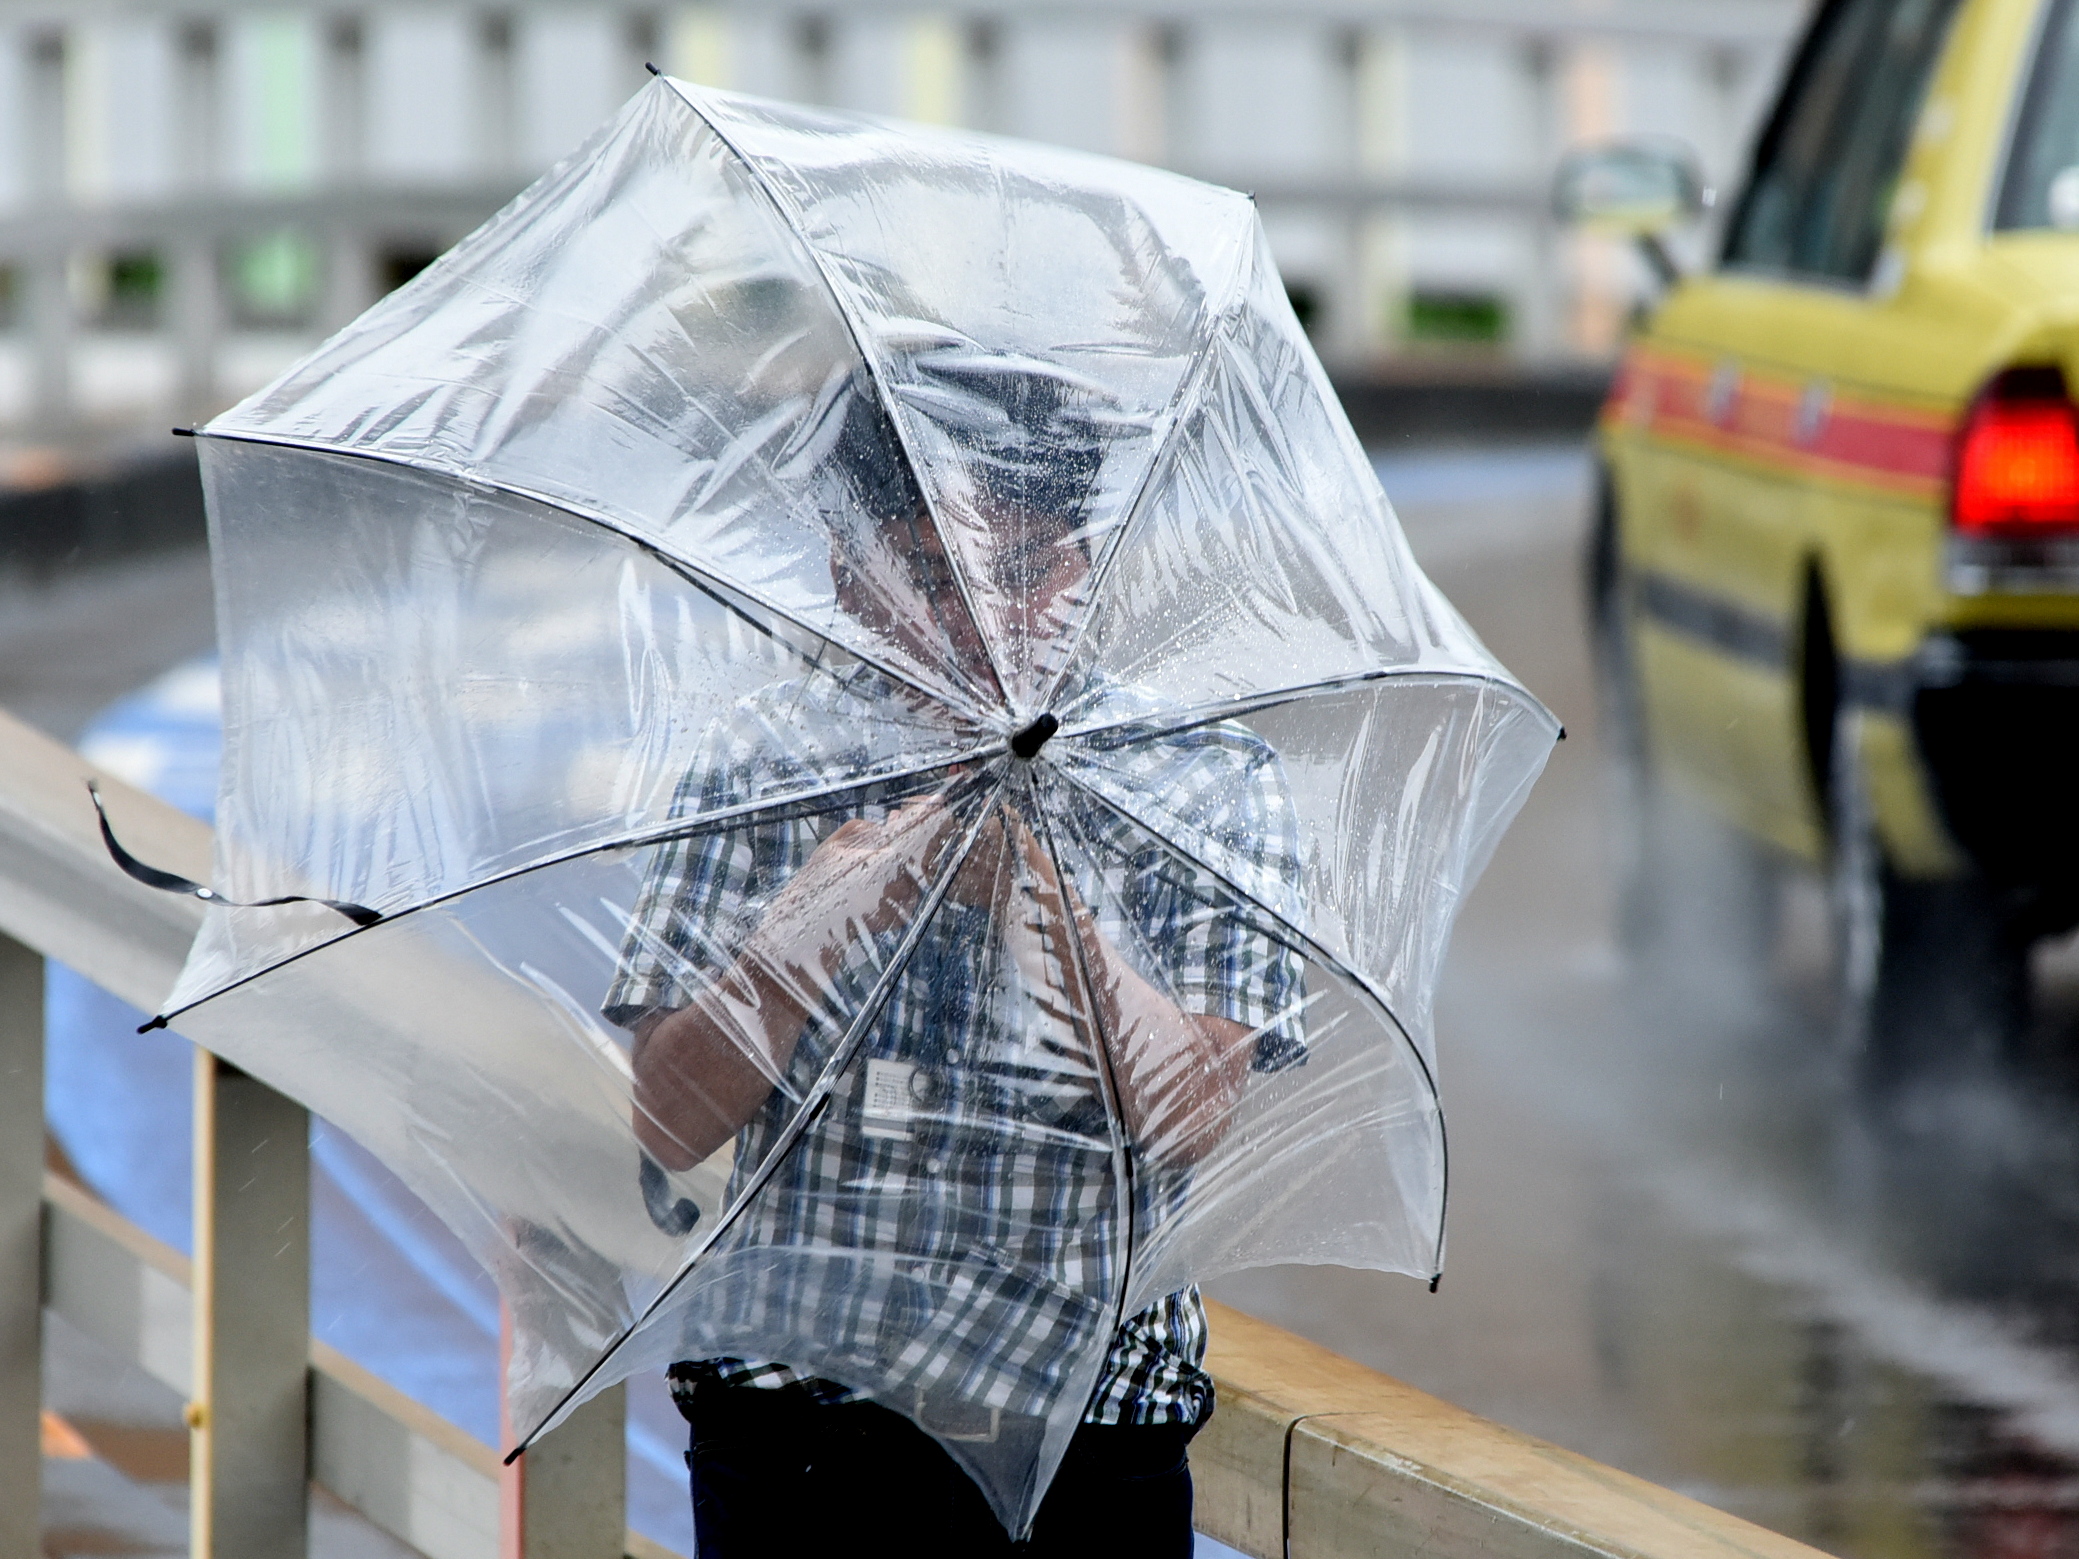 A man's umbrella proves to be no match for the heavy winds of Typhoon Mindulle. | SATOKO KAWASAKI